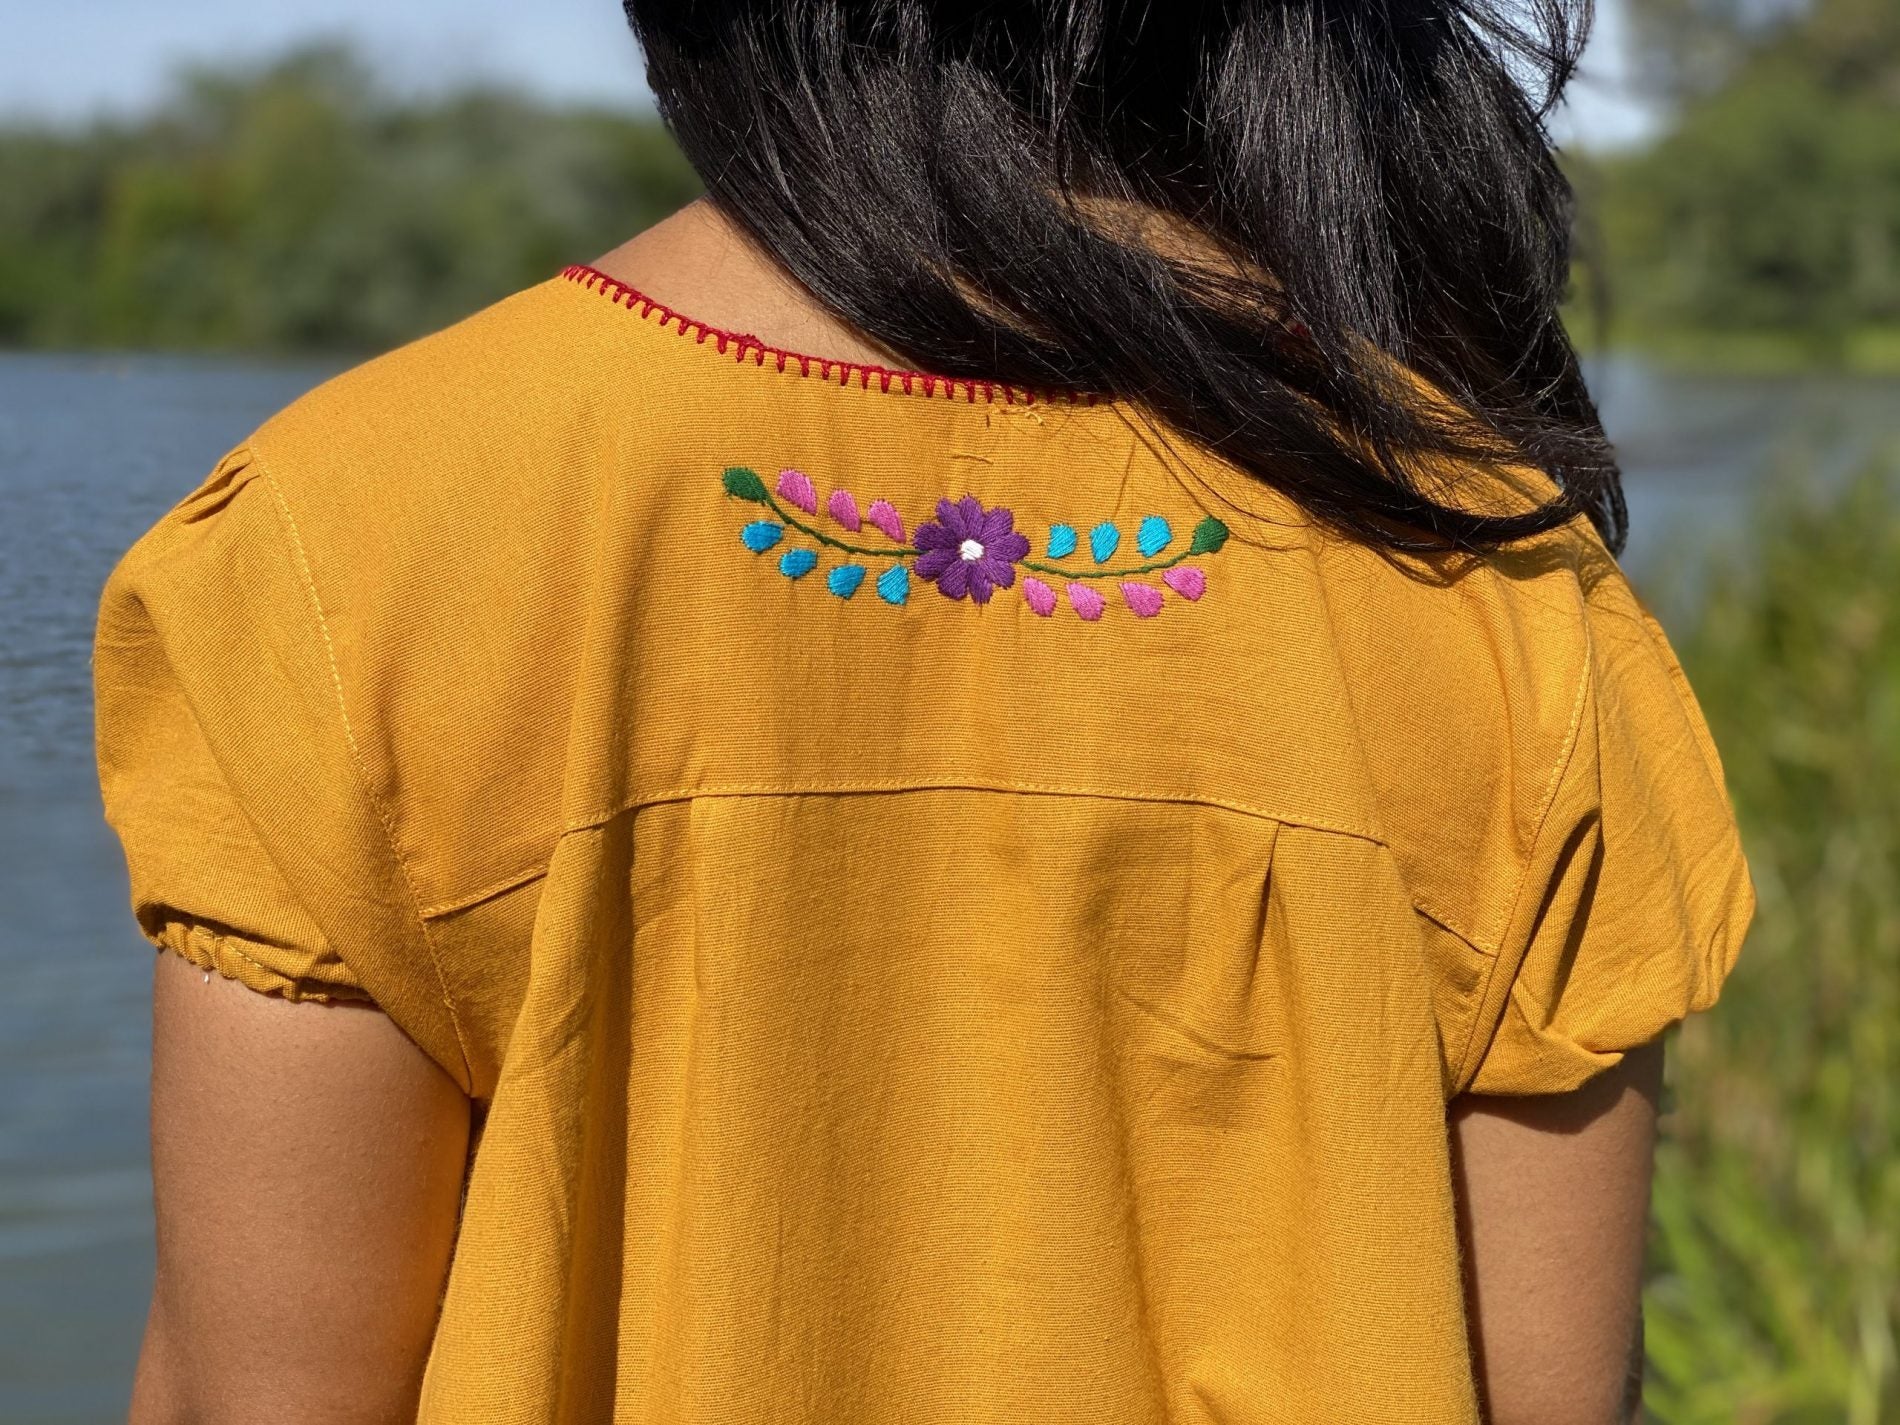 A line style cotton dress, Mexican design of hand embroidered flowers. - Solei Store